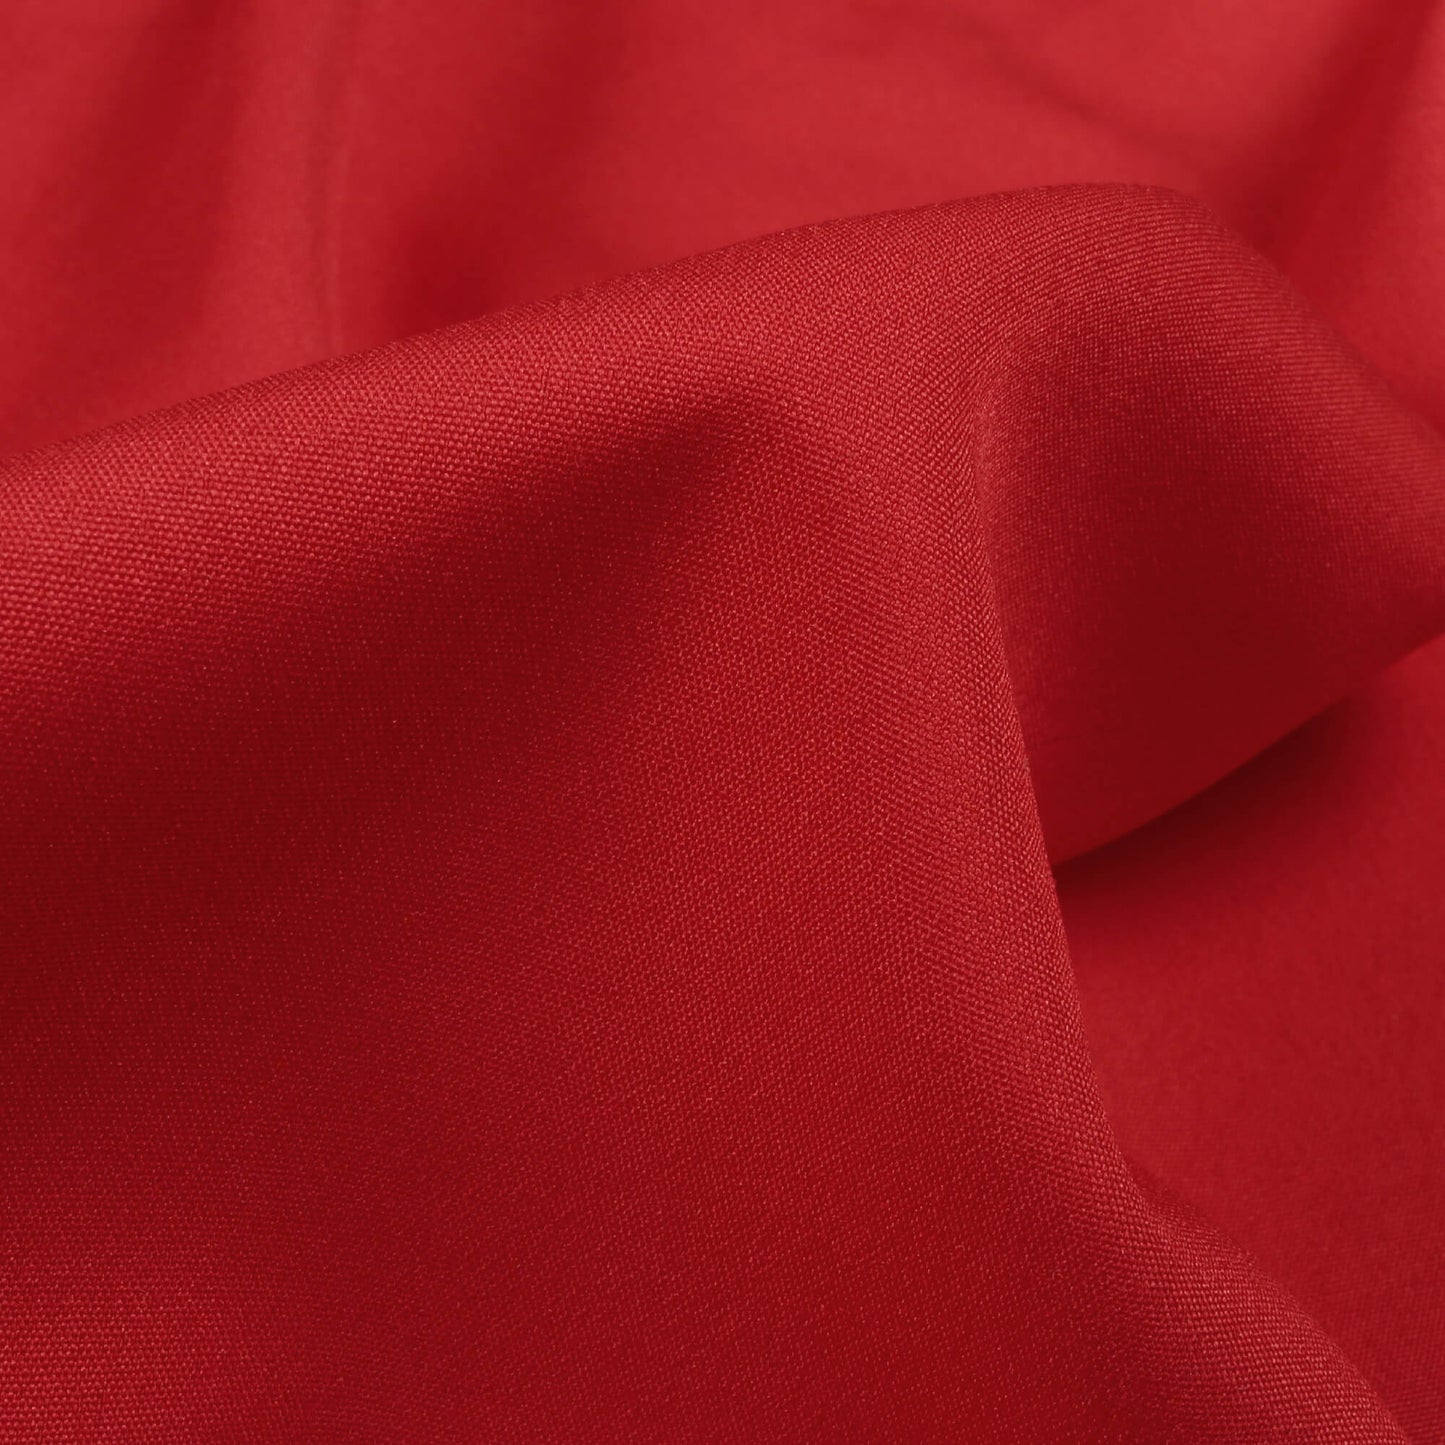 Chilli Red Plain Lining Butter Crepe Fabric